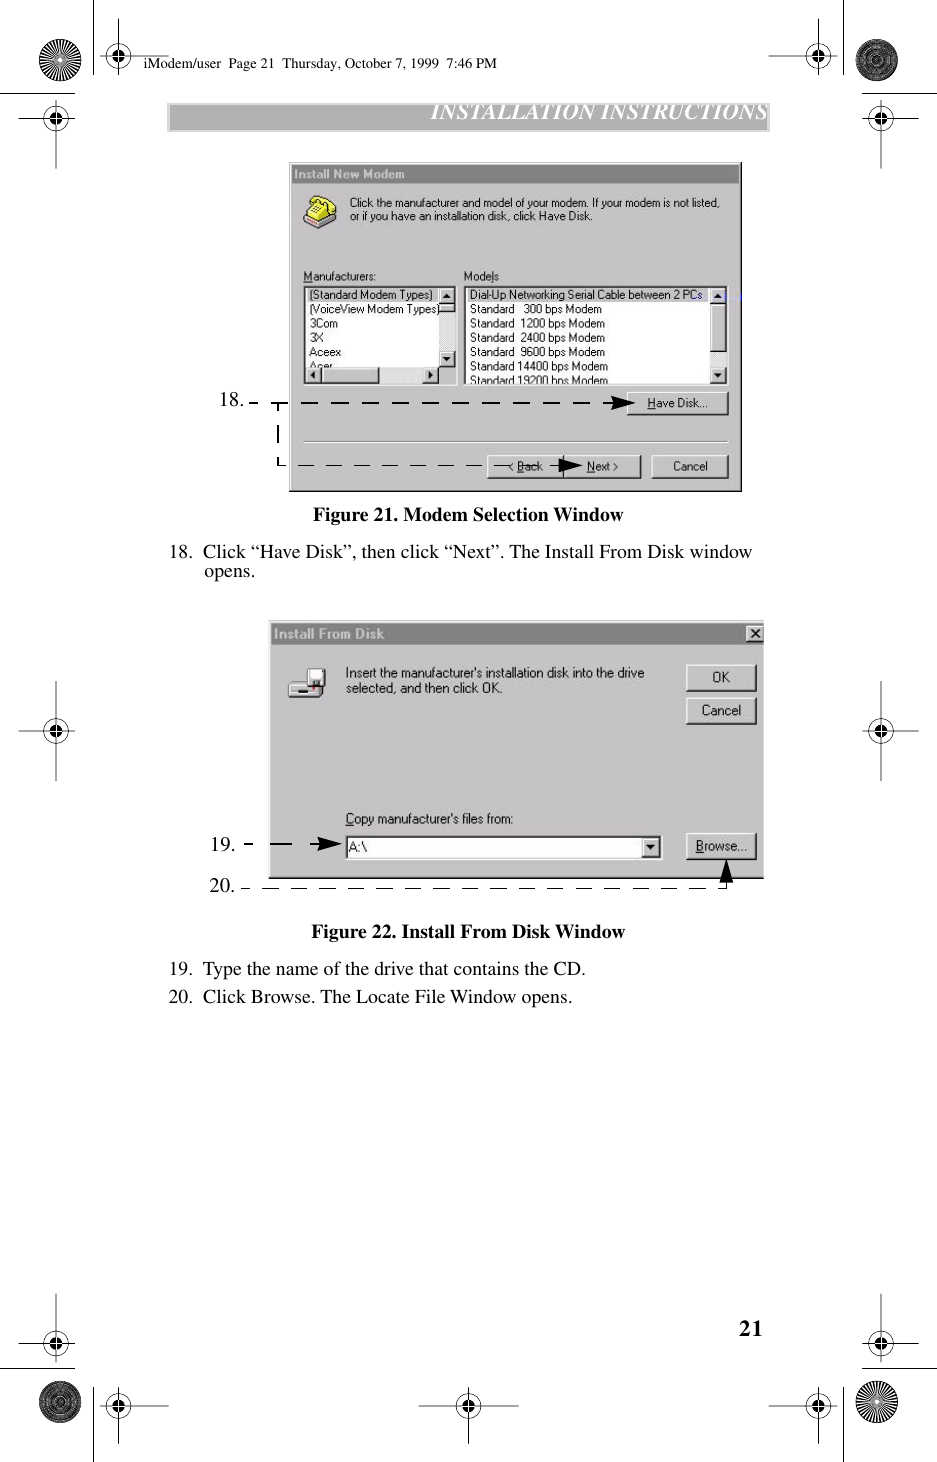 21   INSTALLATION INSTRUCTIONS   Figure 21. Modem Selection Window18.  Click “Have Disk”, then click “Next”. The Install From Disk window opens.   Figure 22. Install From Disk Window19.  Type the name of the drive that contains the CD.20.  Click Browse. The Locate File Window opens. 18. 19. 20.iModem/user  Page 21  Thursday, October 7, 1999  7:46 PM